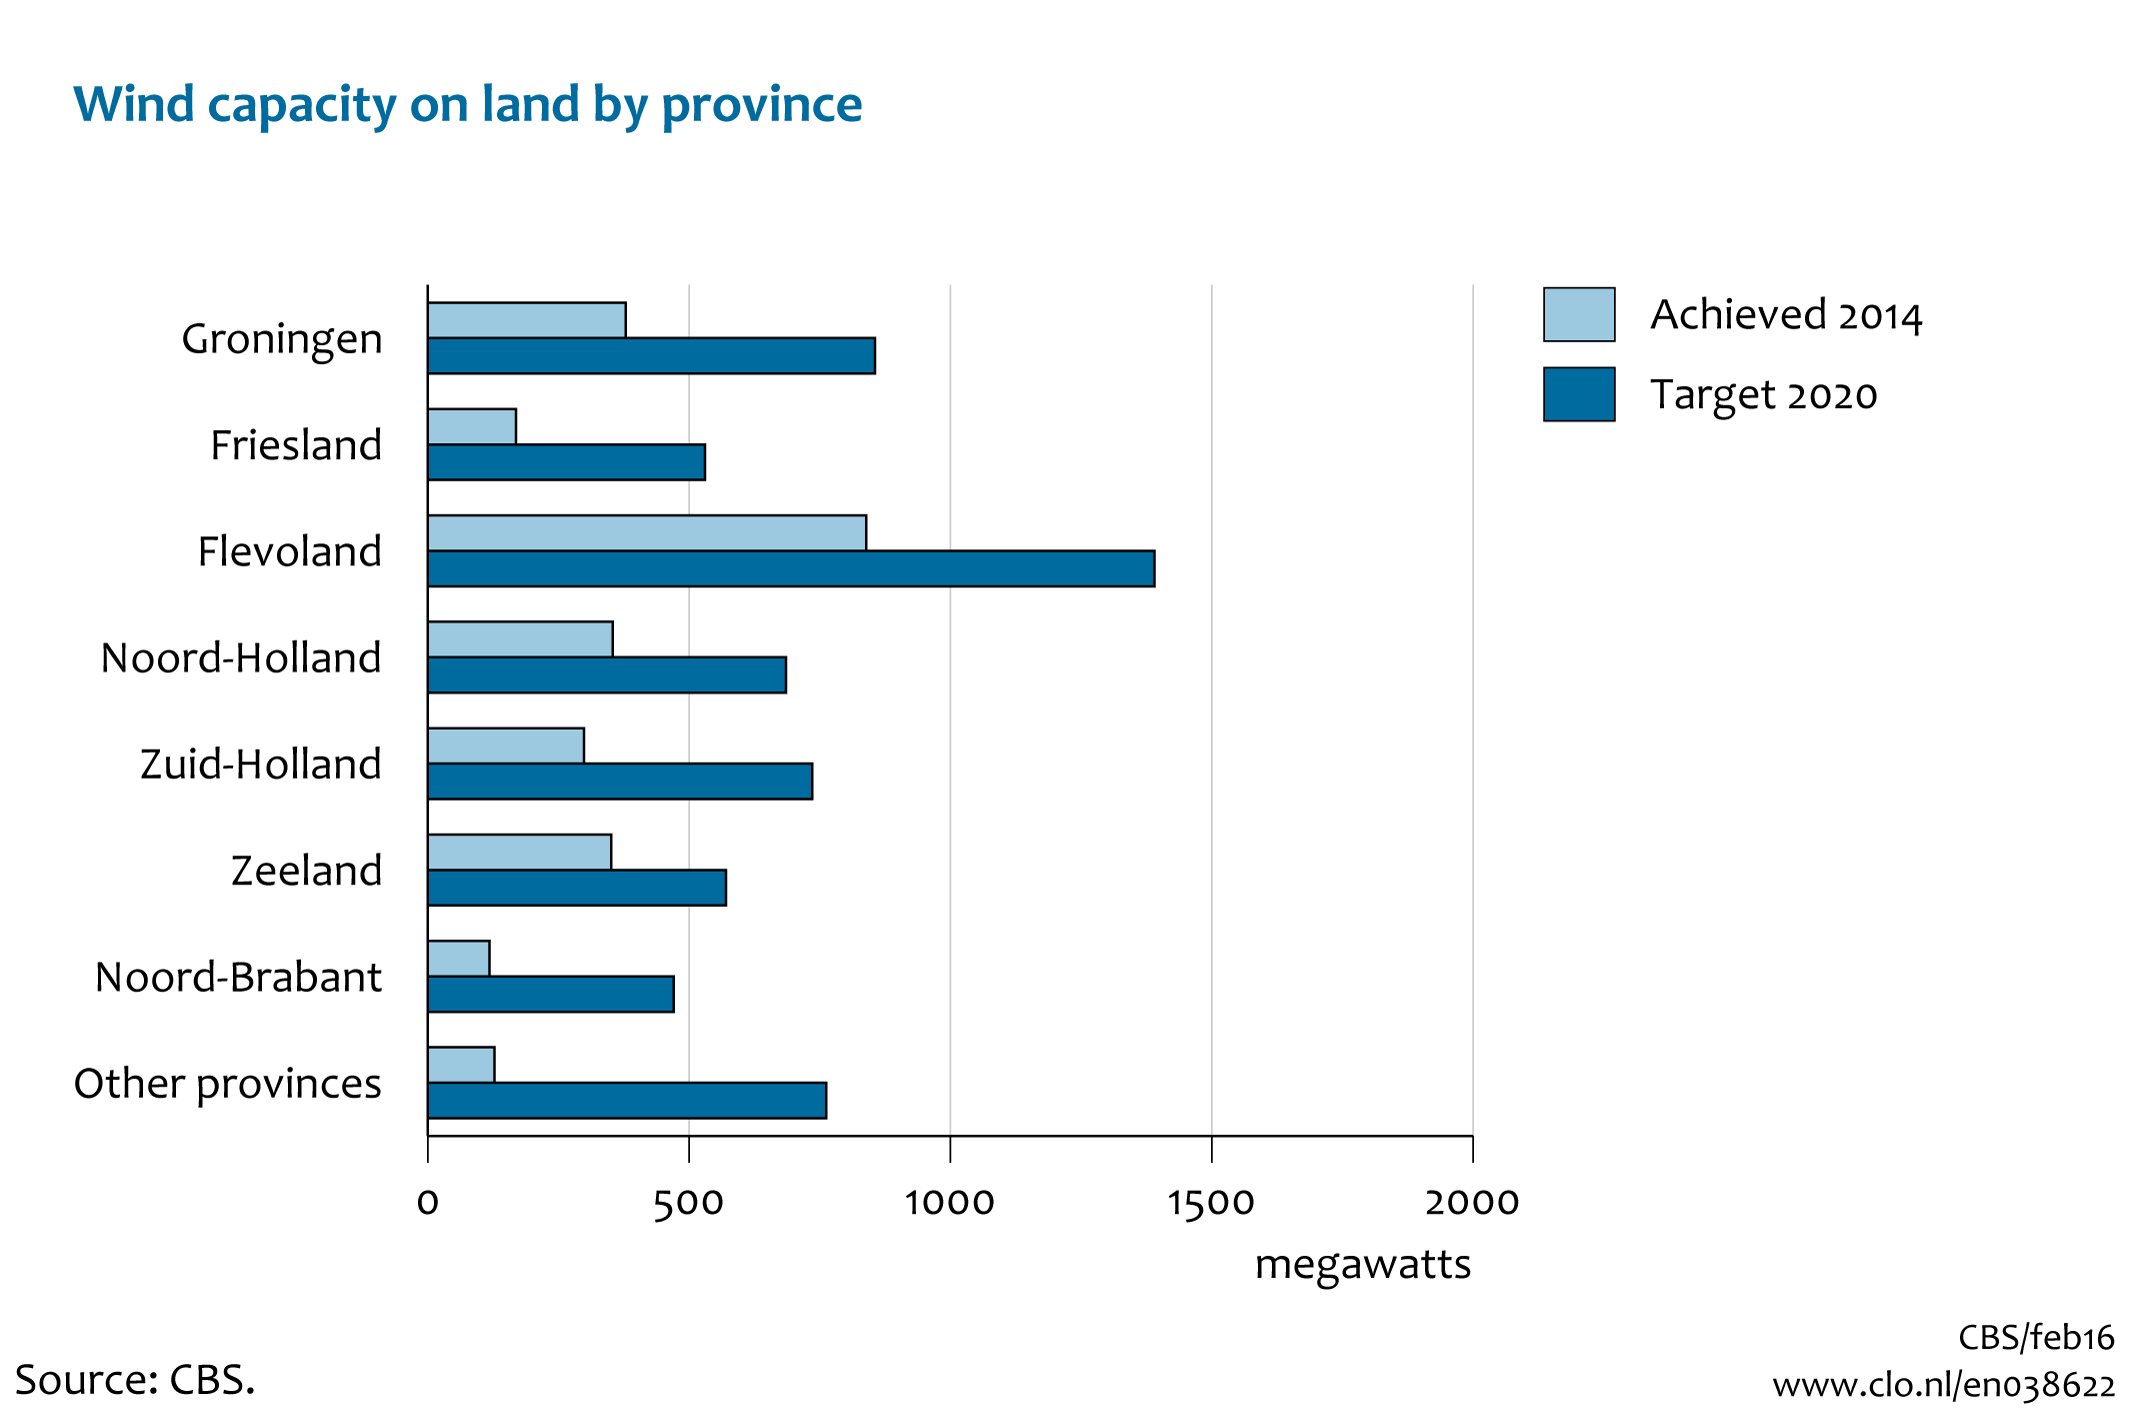 Image Wind capacity on land by province and sea. The image is further explained in the text.